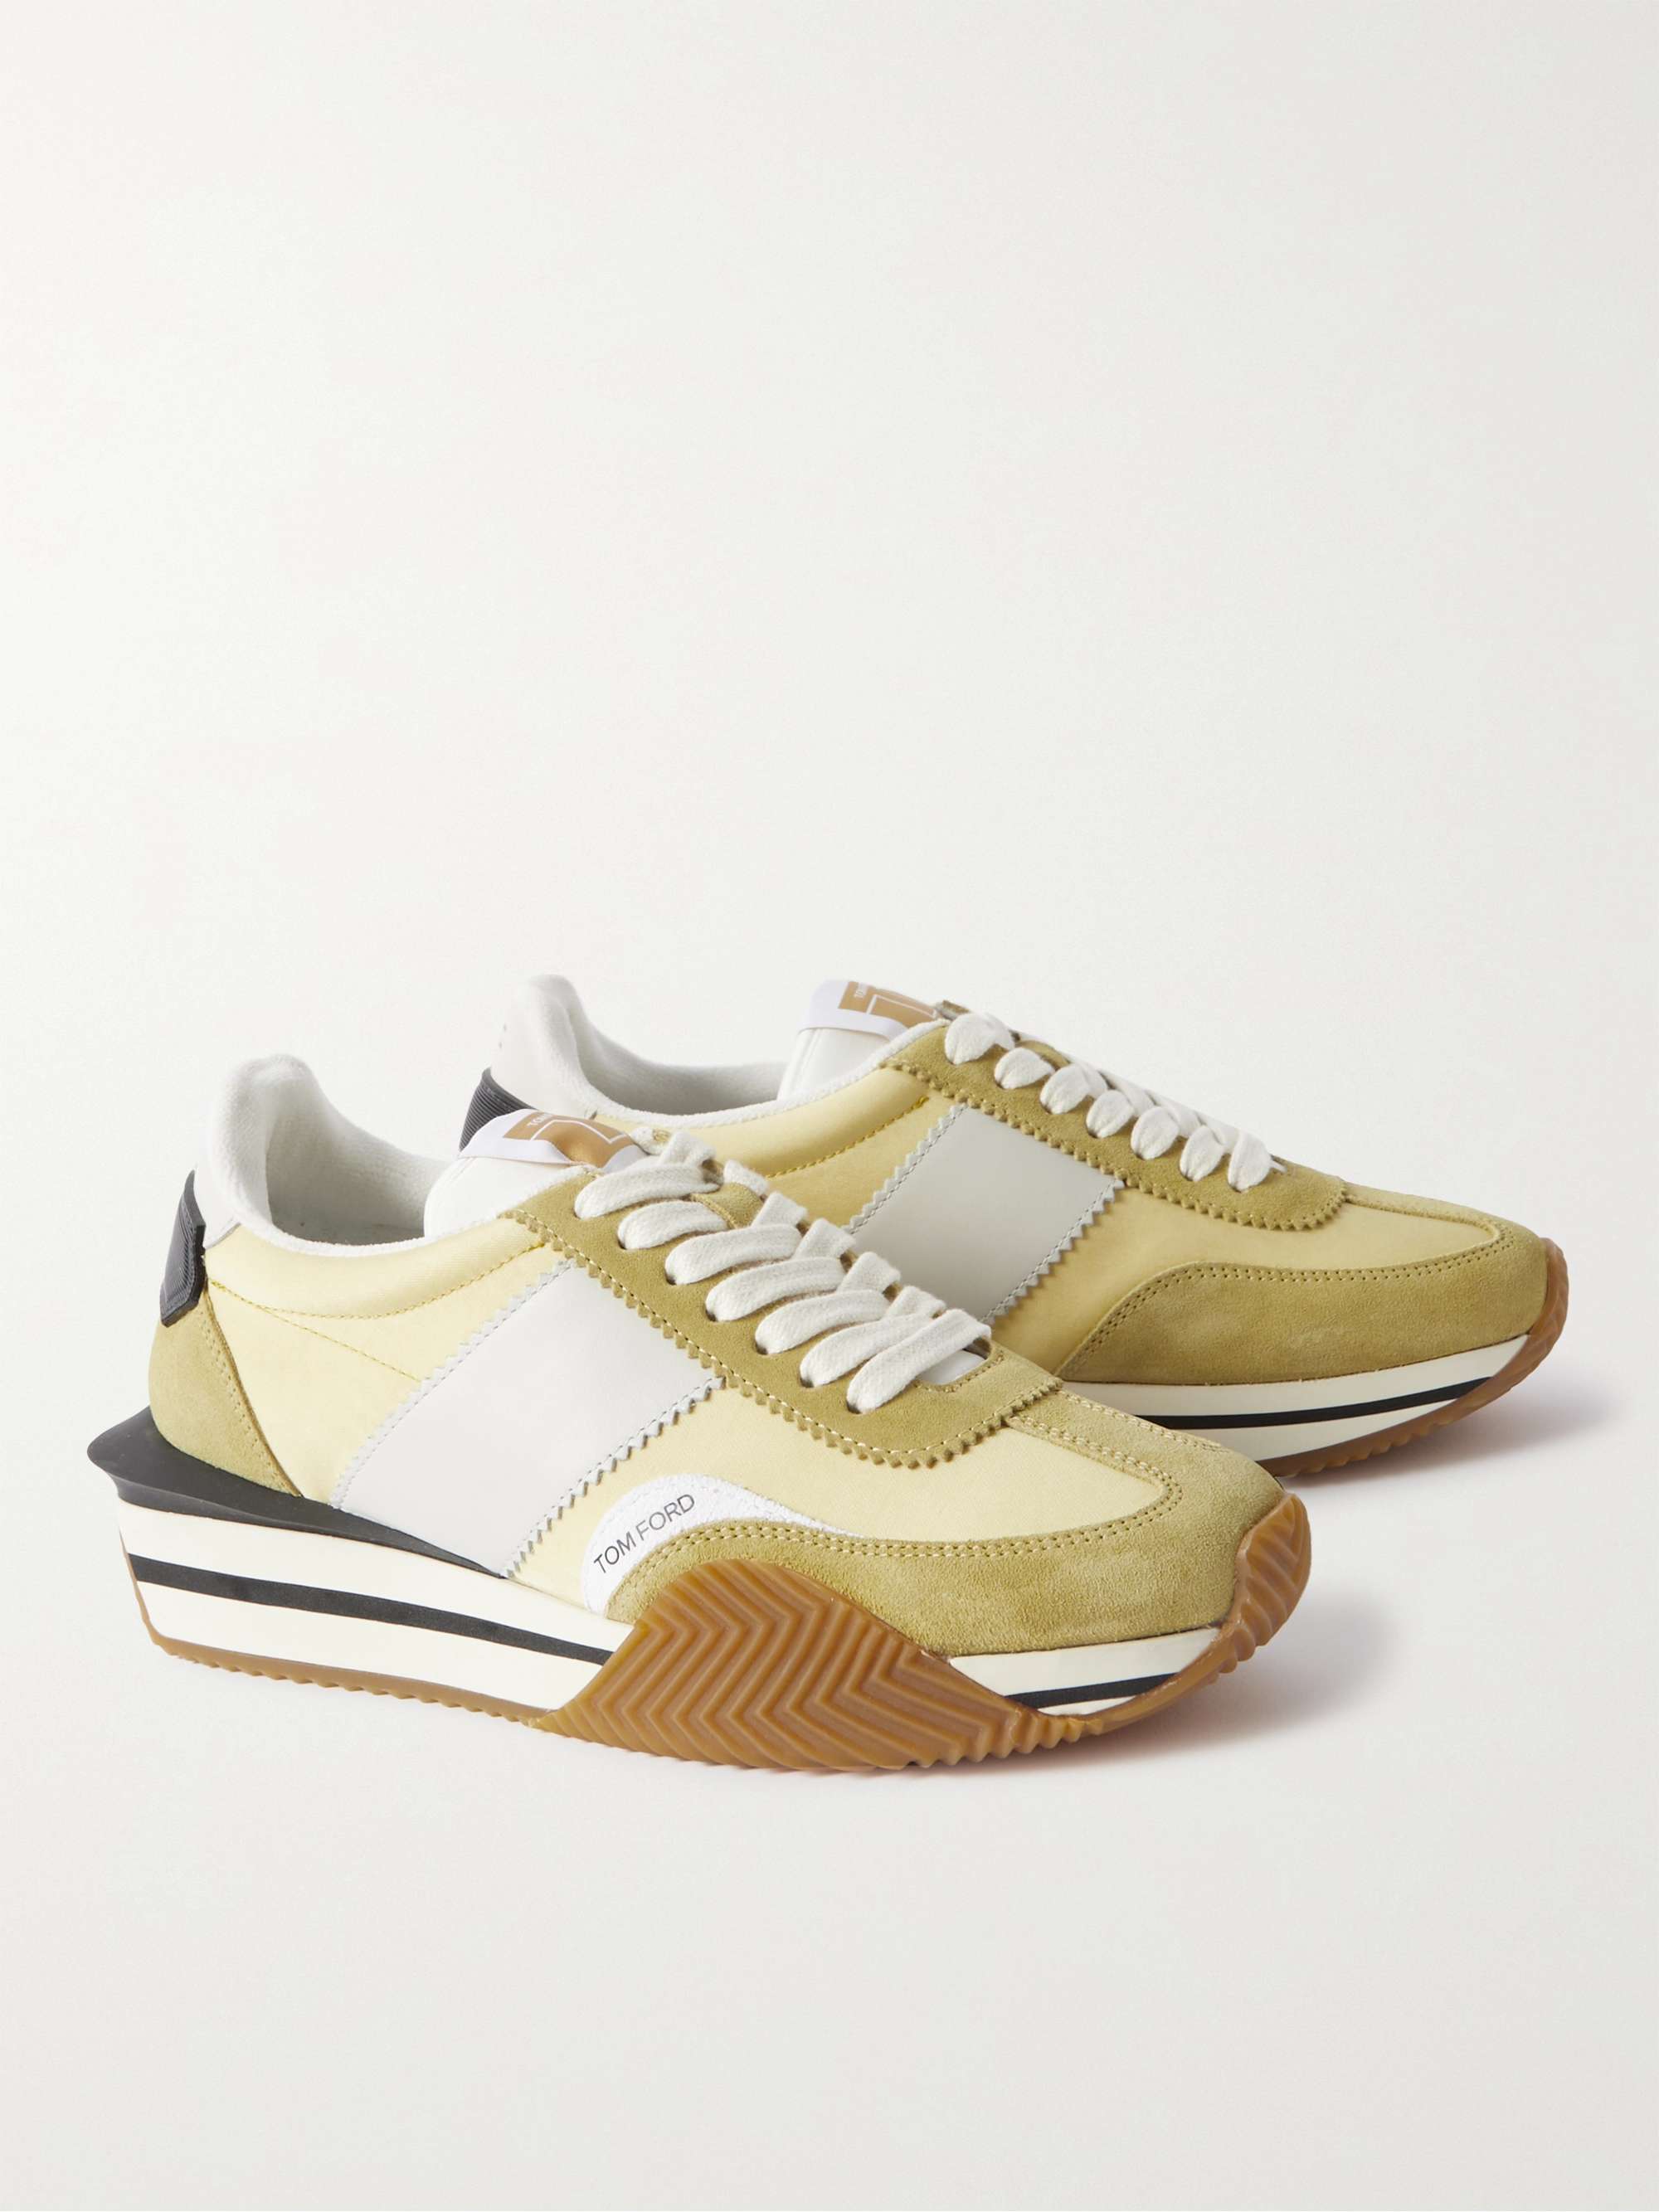 TOM FORD James Rubber-Trimmed Leather, Suede and Nylon Sneakers